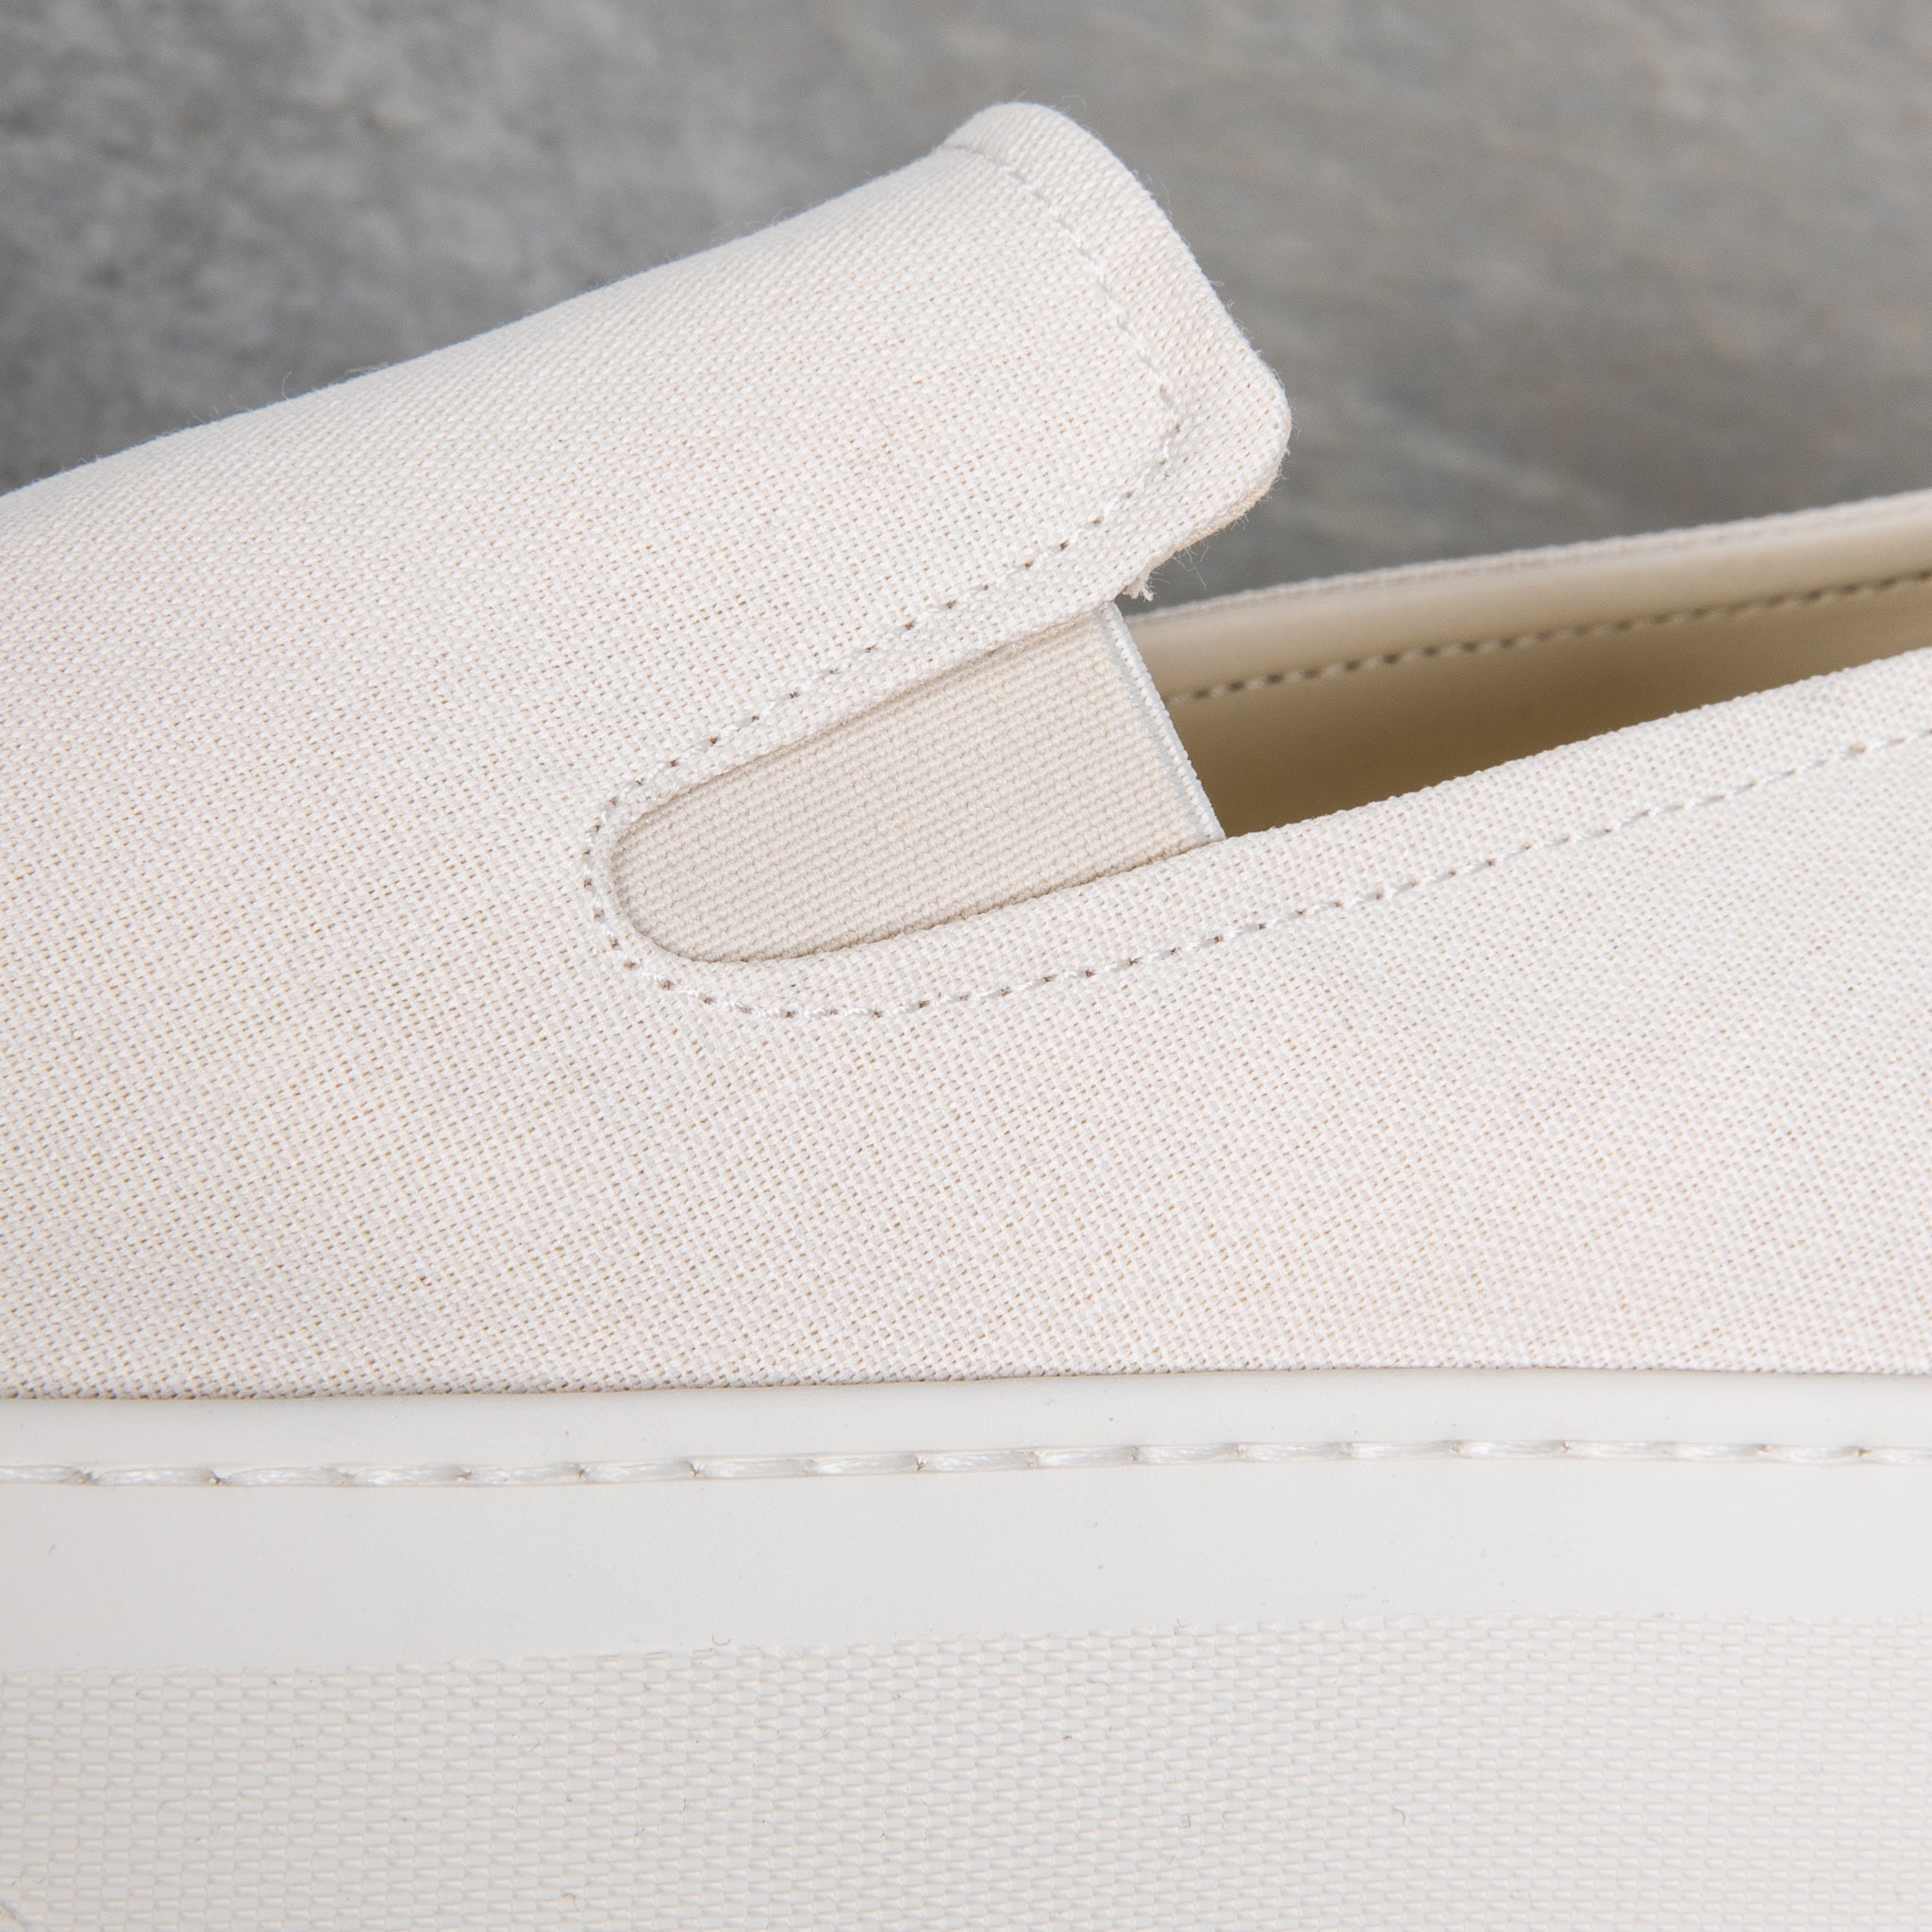 Common Projects 5217 Slip-On in Canvas Off-White